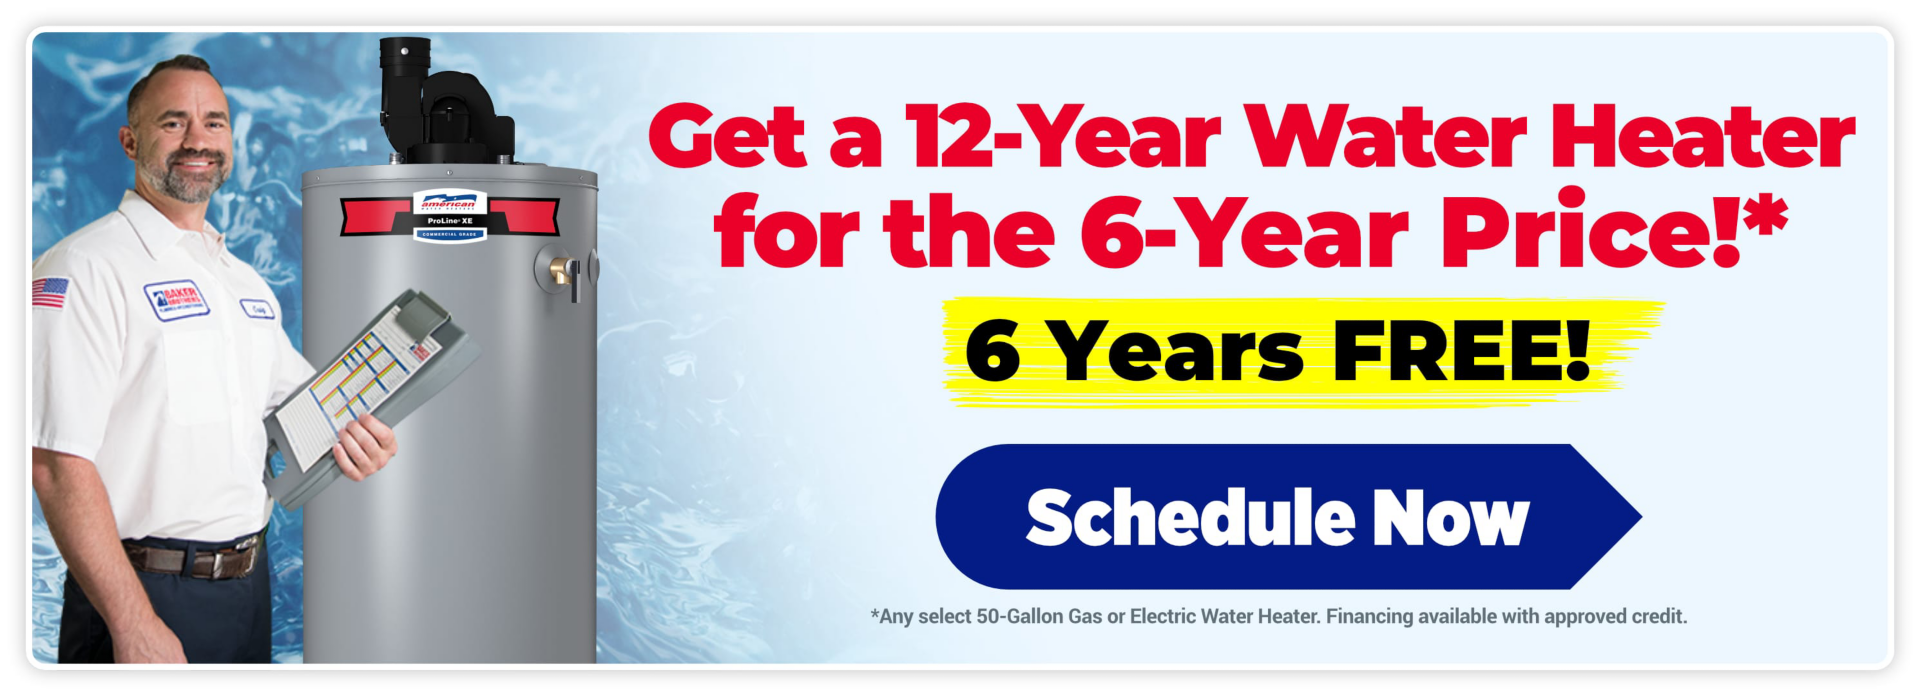 Get a 12-Year Water Heater for the 6-Year Price